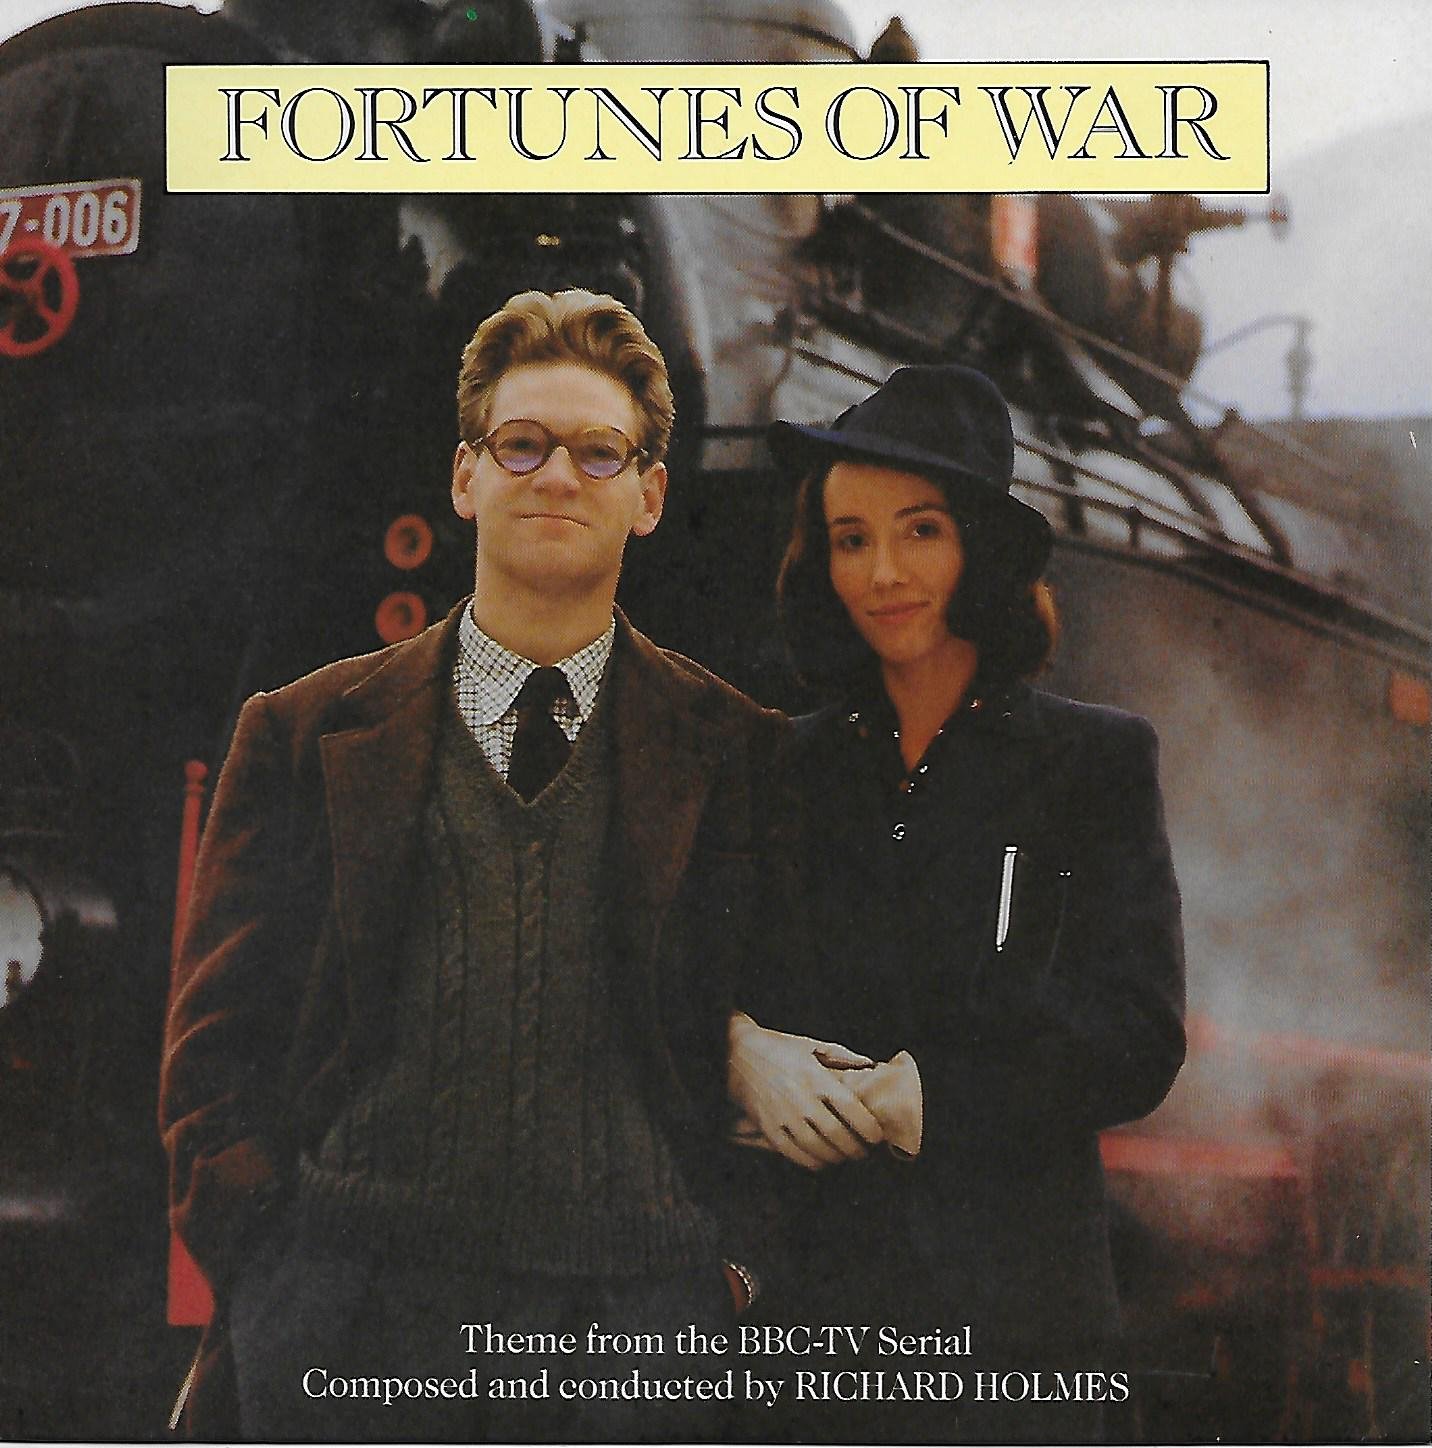 Picture of RESL 221 Fortunes of war by artist Richard Holmes / Pavel's Rumanian Ensemble / The United Kingdom Symphony Orchestra from the BBC singles - Records and Tapes library